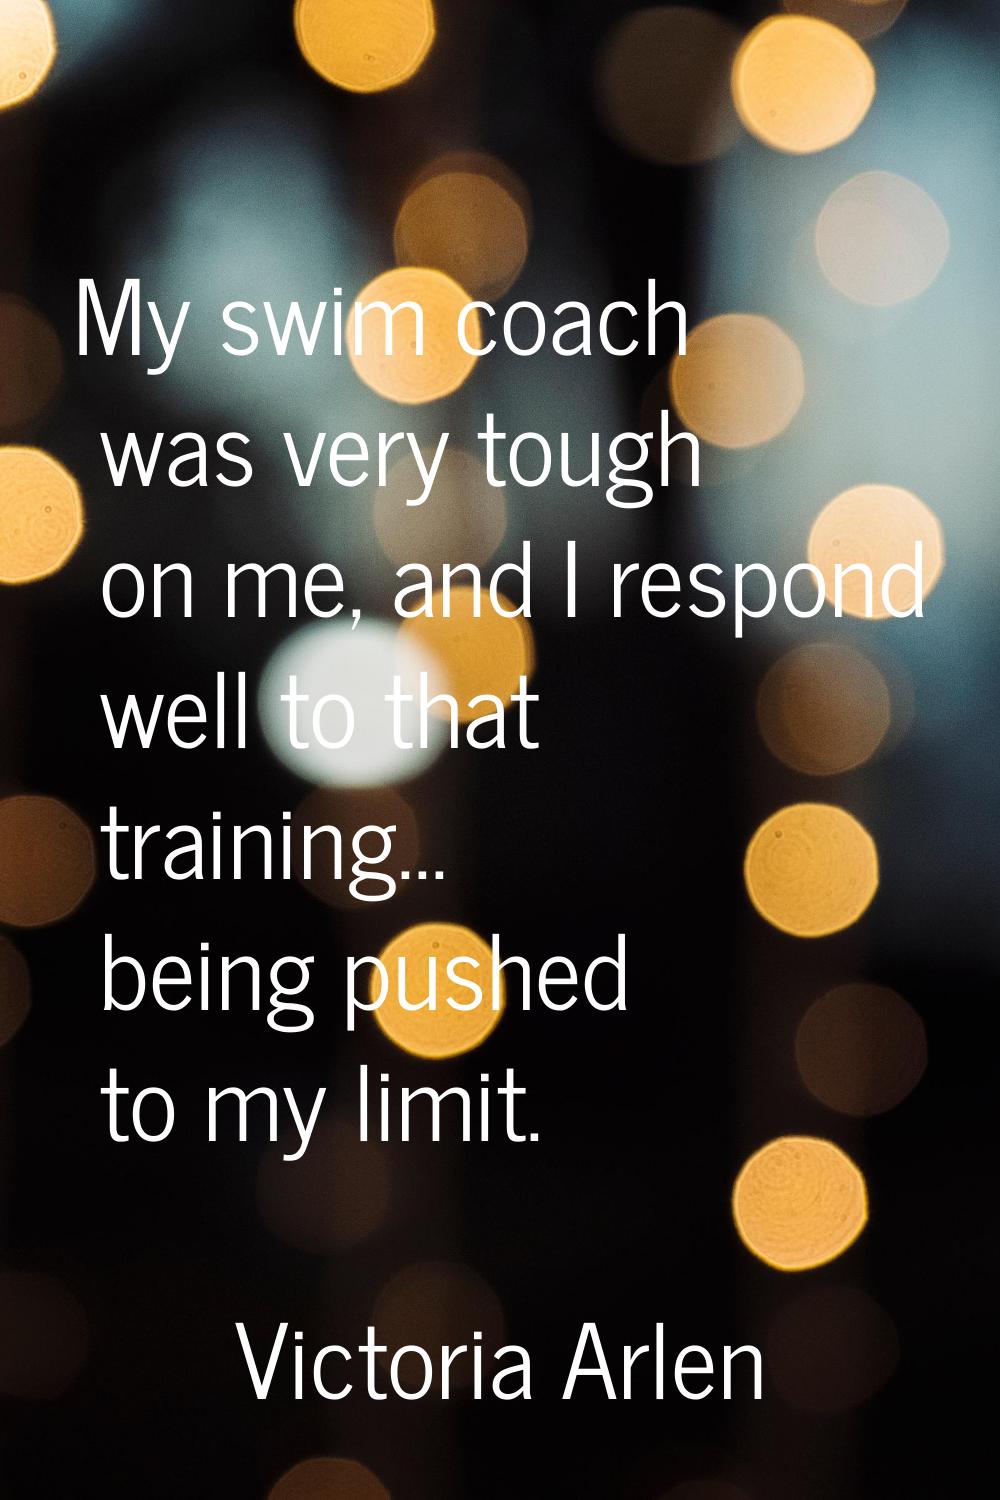 My swim coach was very tough on me, and I respond well to that training... being pushed to my limit